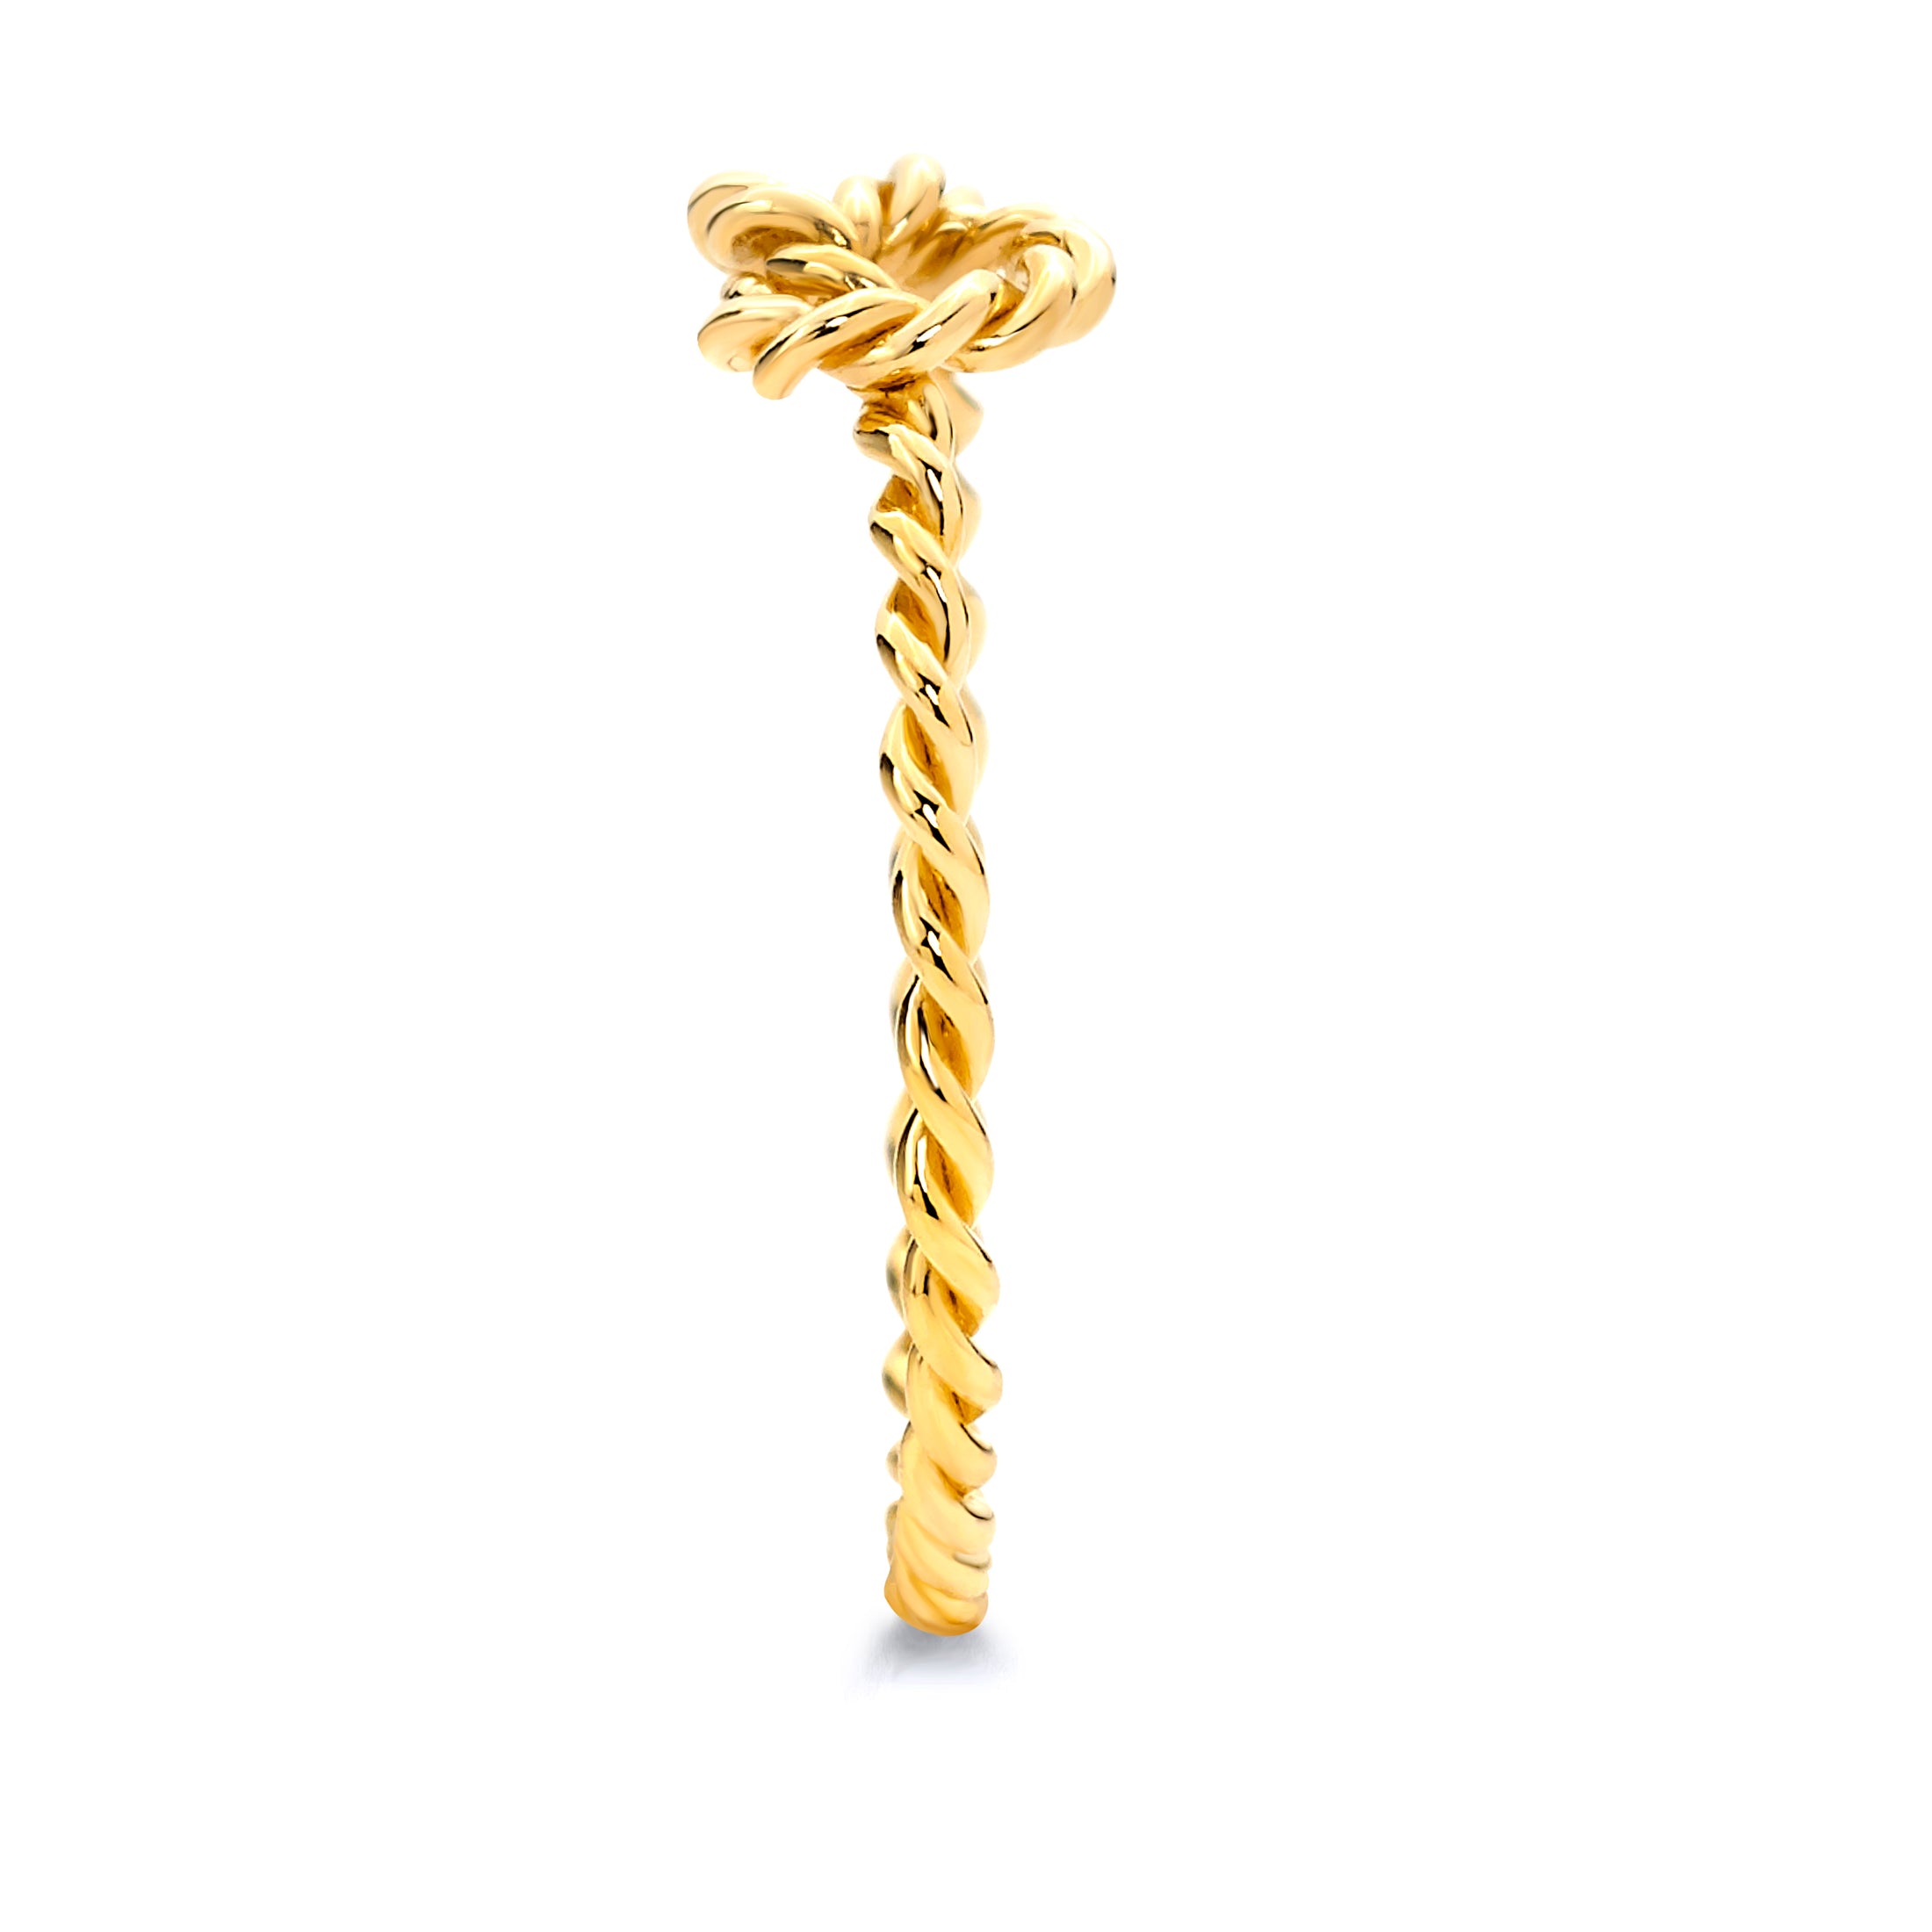 Solid Gold Knot Ring - 10k or 14k